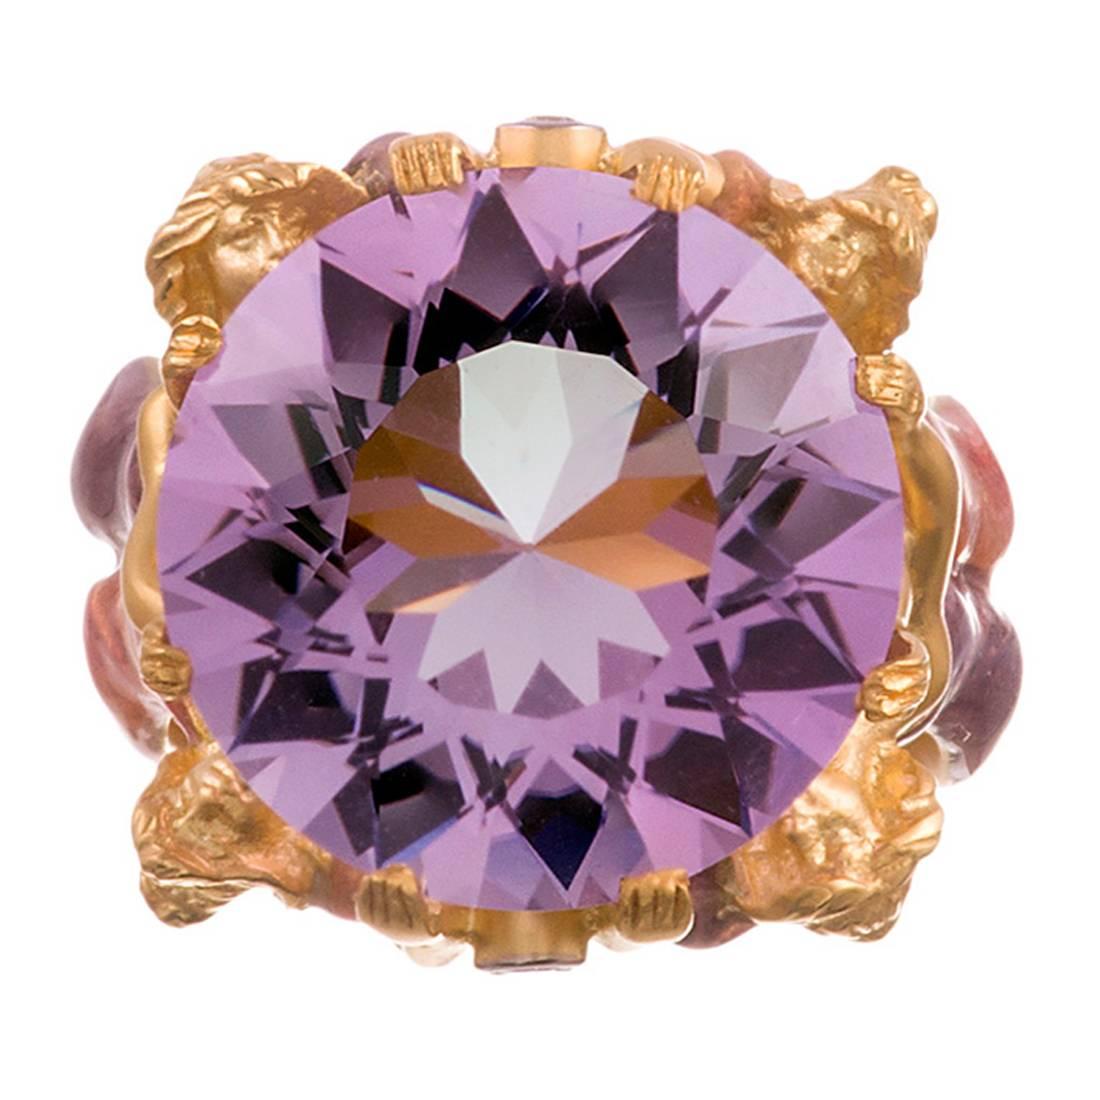 Another ultra-feminie creation, compliments of famed “plaque-a-jour” enamel specialists Masriera. This piece is designed as four nymphs dressed in pink and purple gowns, lifting up and suspending a large round faceted amethyst above their heads. The